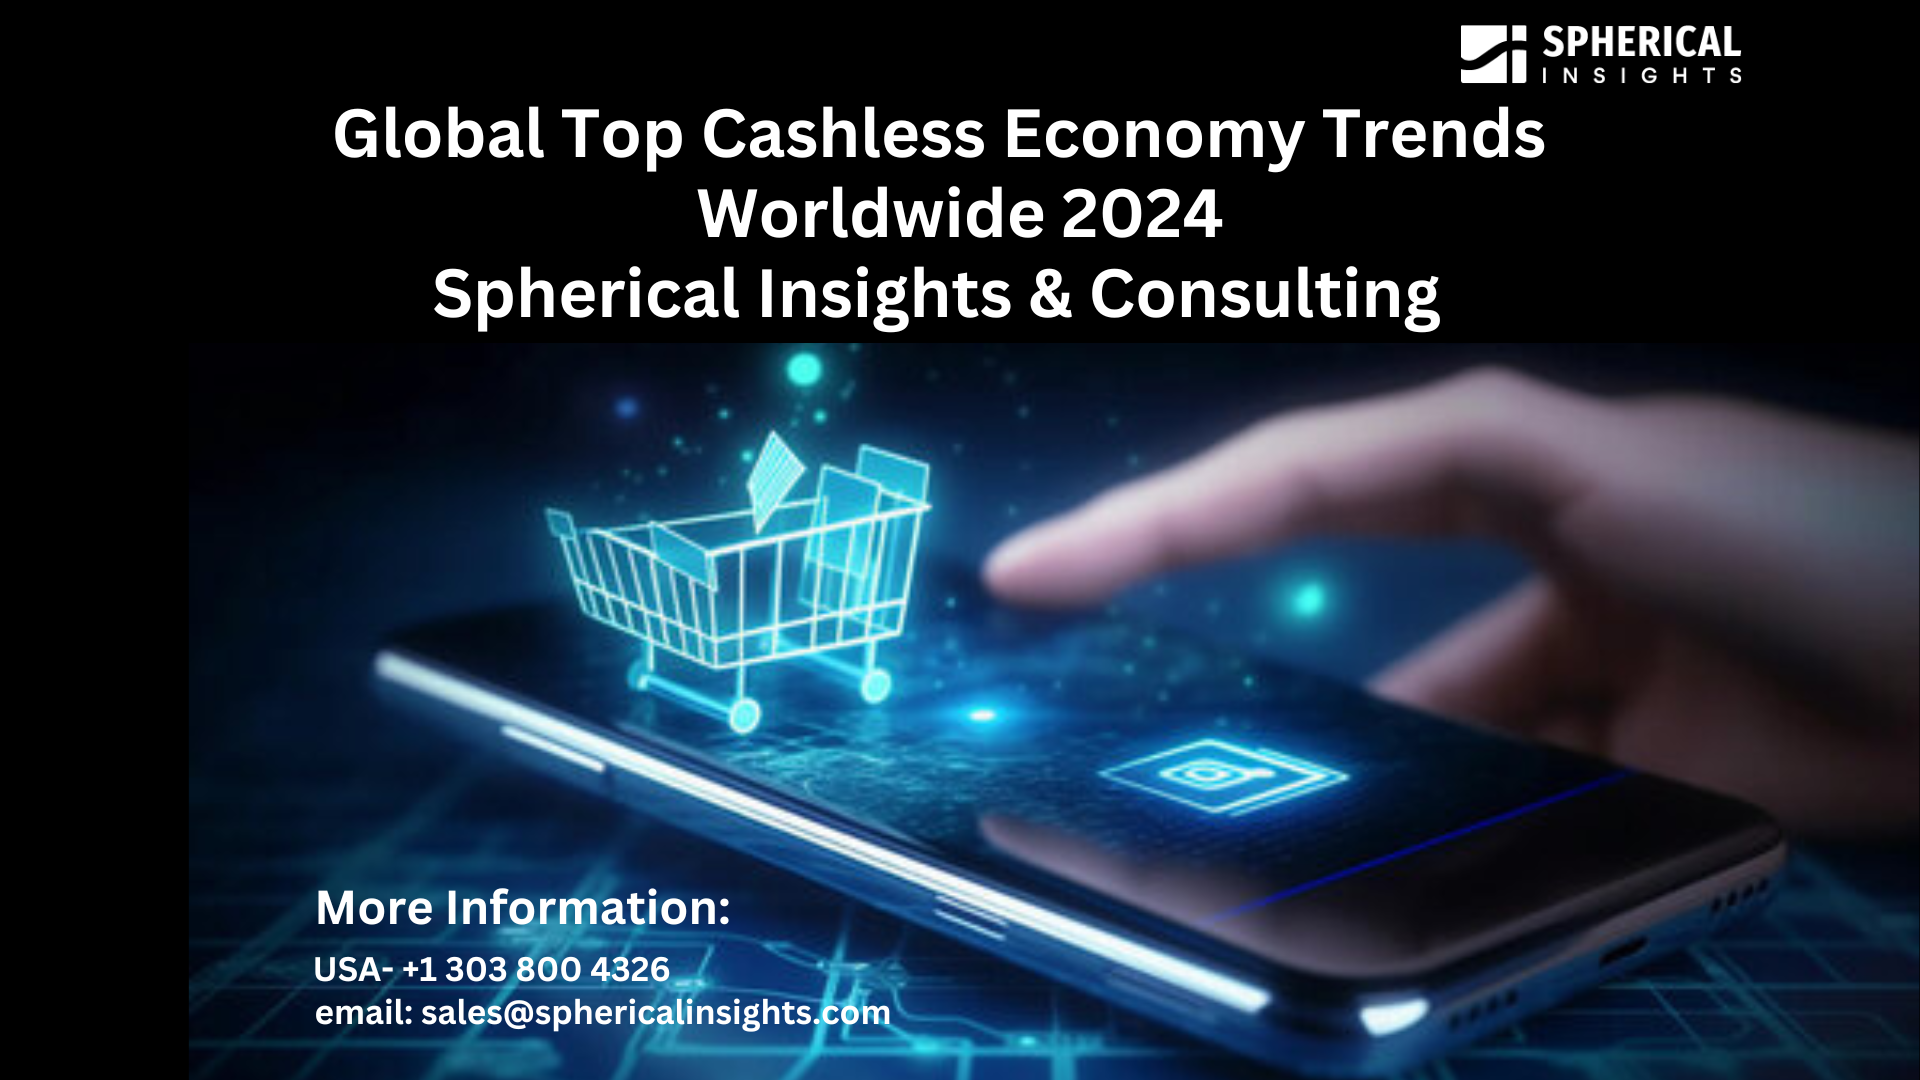 Global Top Cashless Economy Trends, Worldwide 2024; Explore In Details; Spherical Insights & Consulting